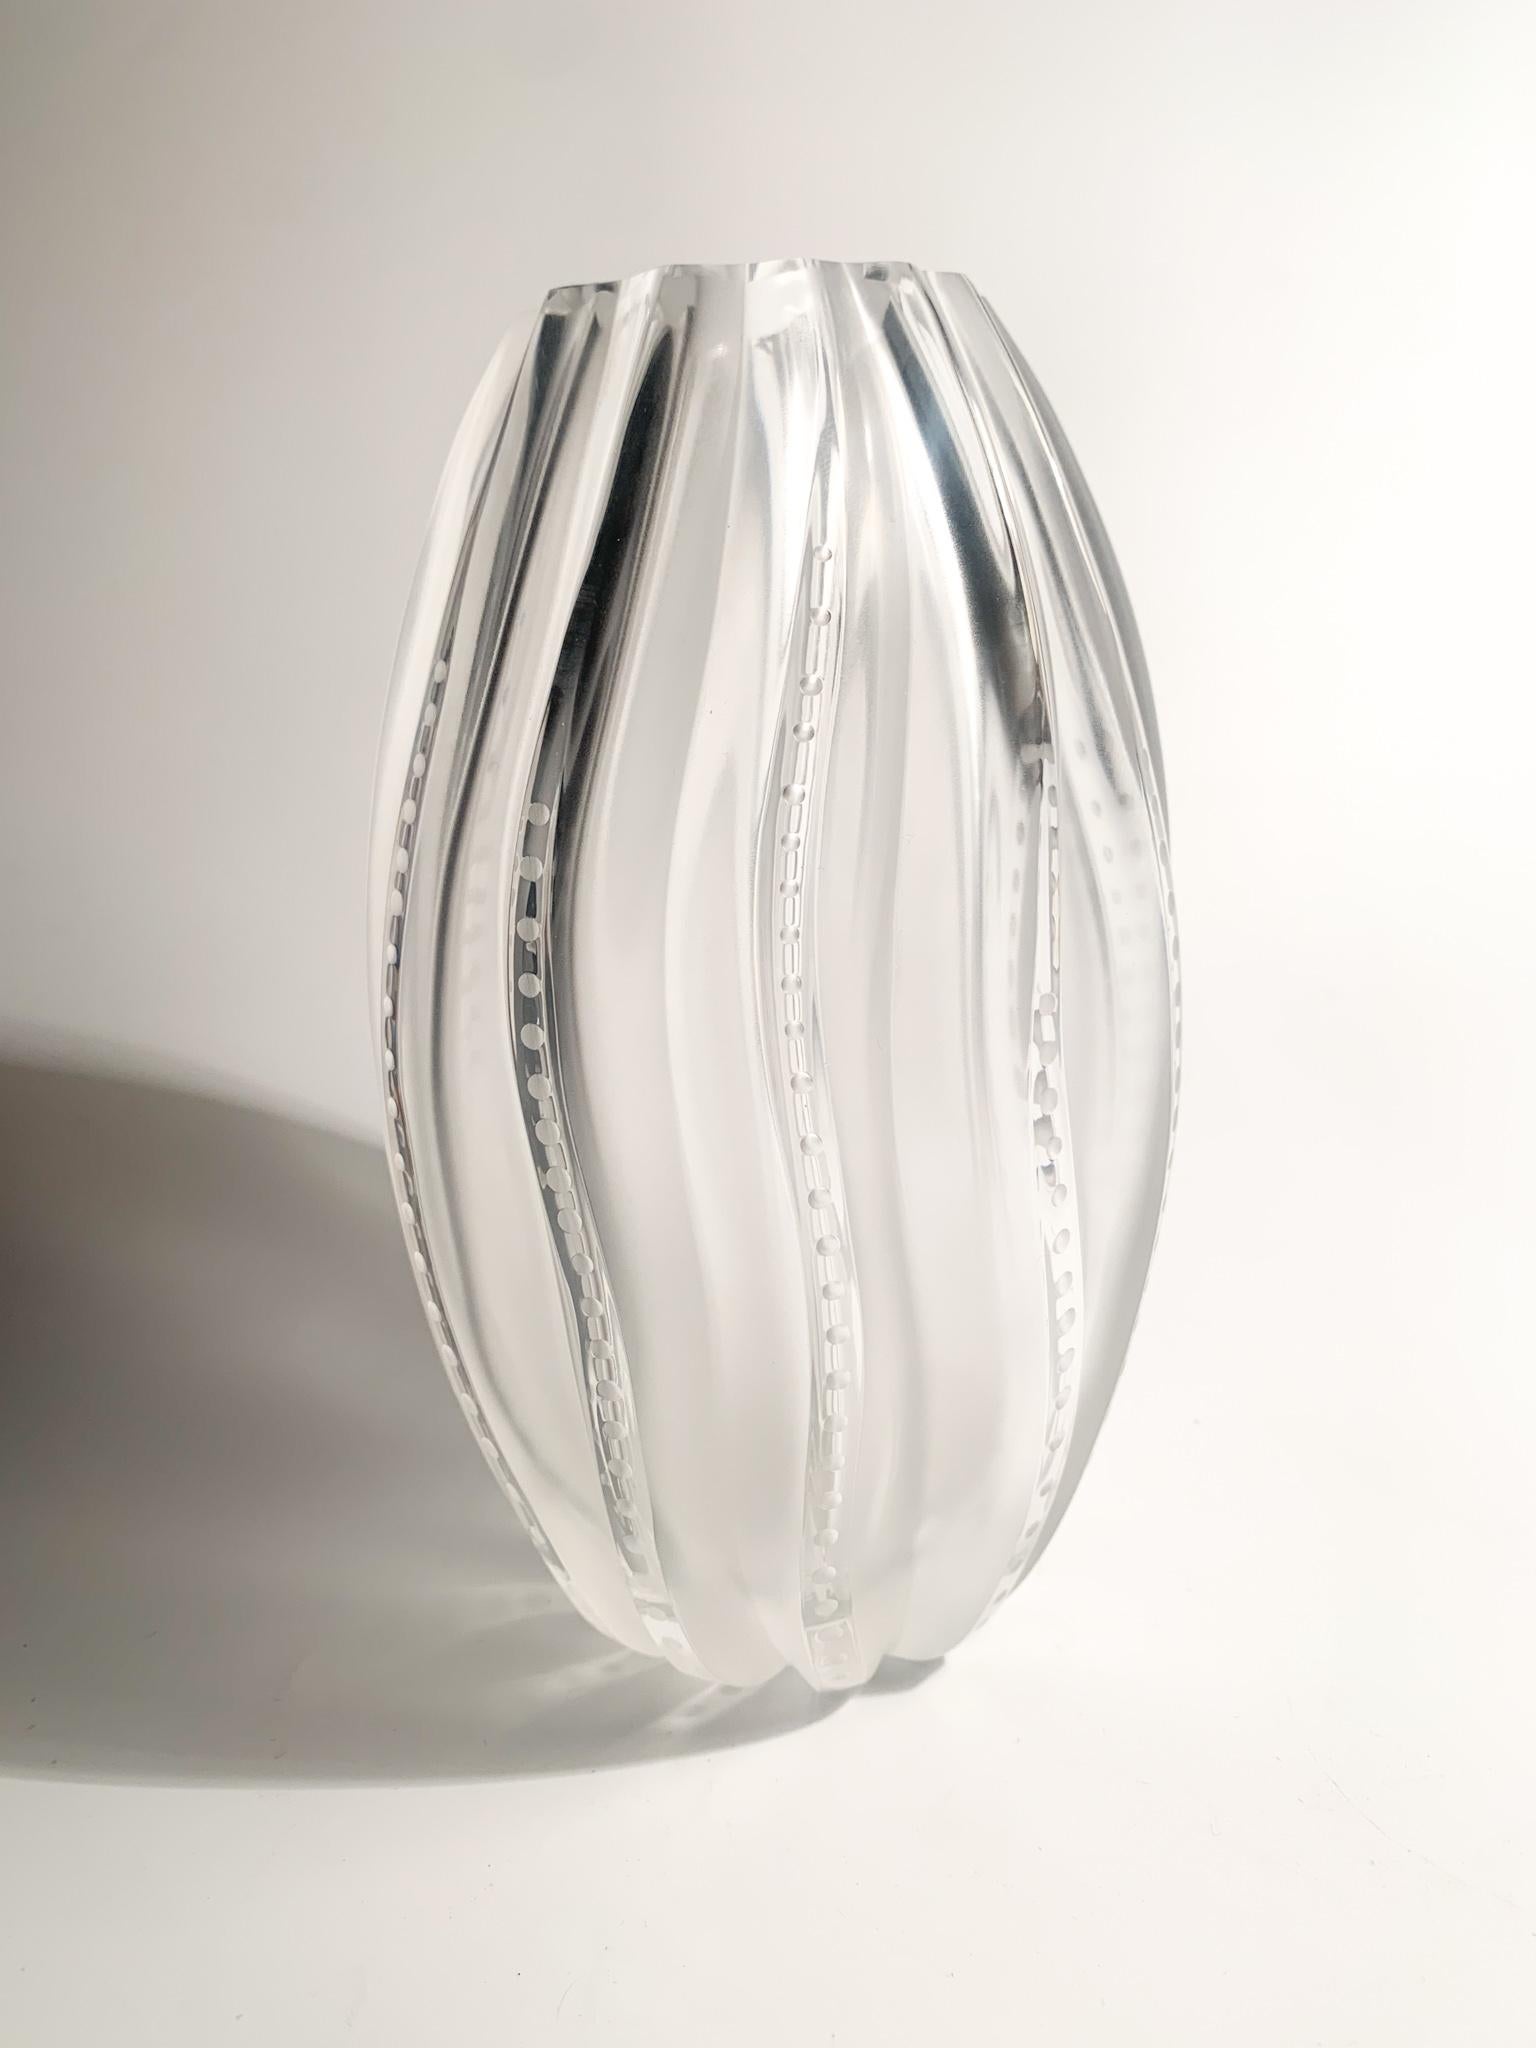 French Lalique Crystal Medusa Vase from the 1970s For Sale 6